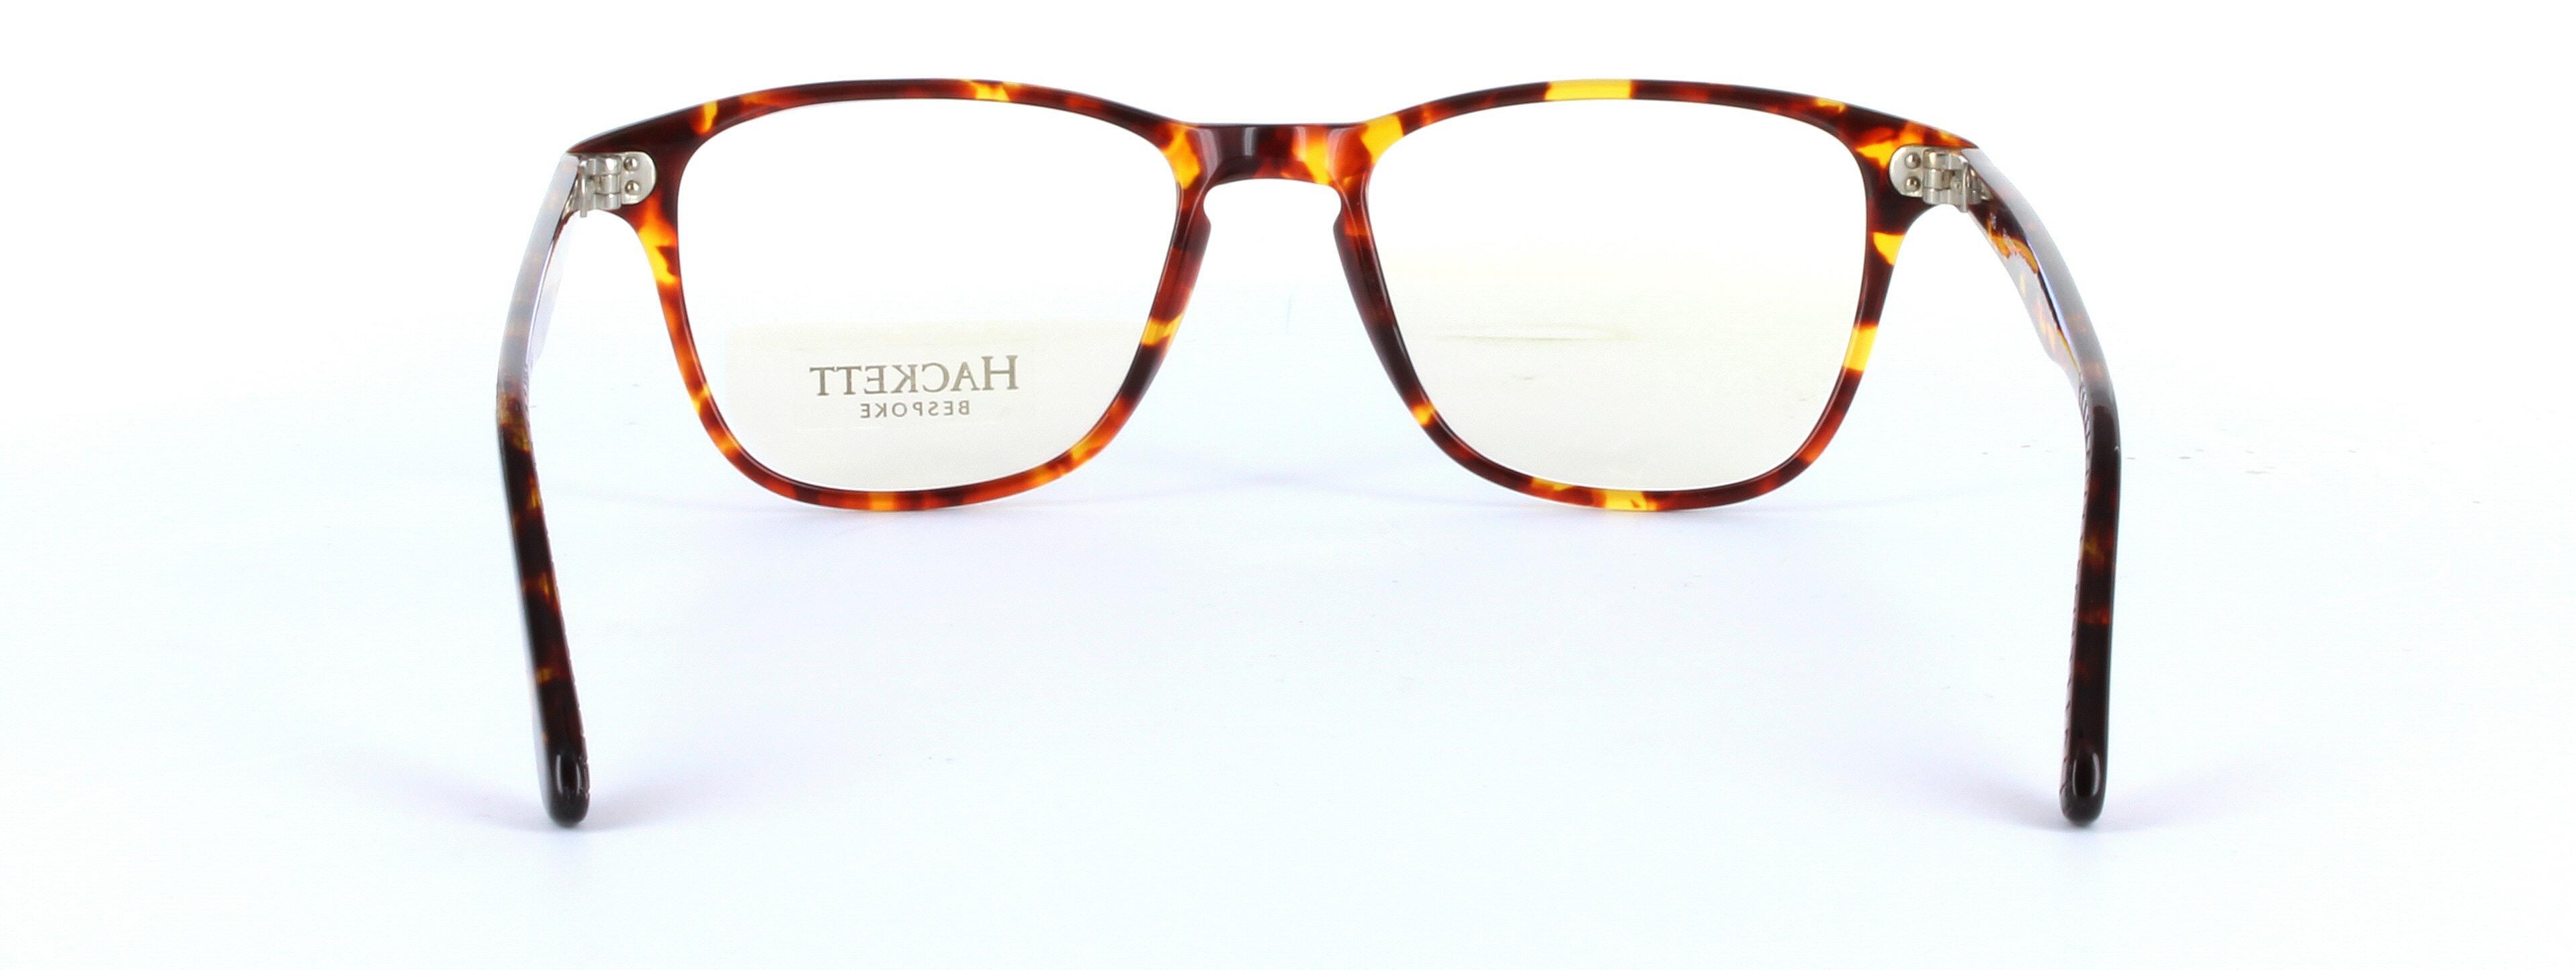 HACKETT BESPOKE (HEB140-127) Brown Full Rim Oval Round Square Acetate Glasses - Image View 3